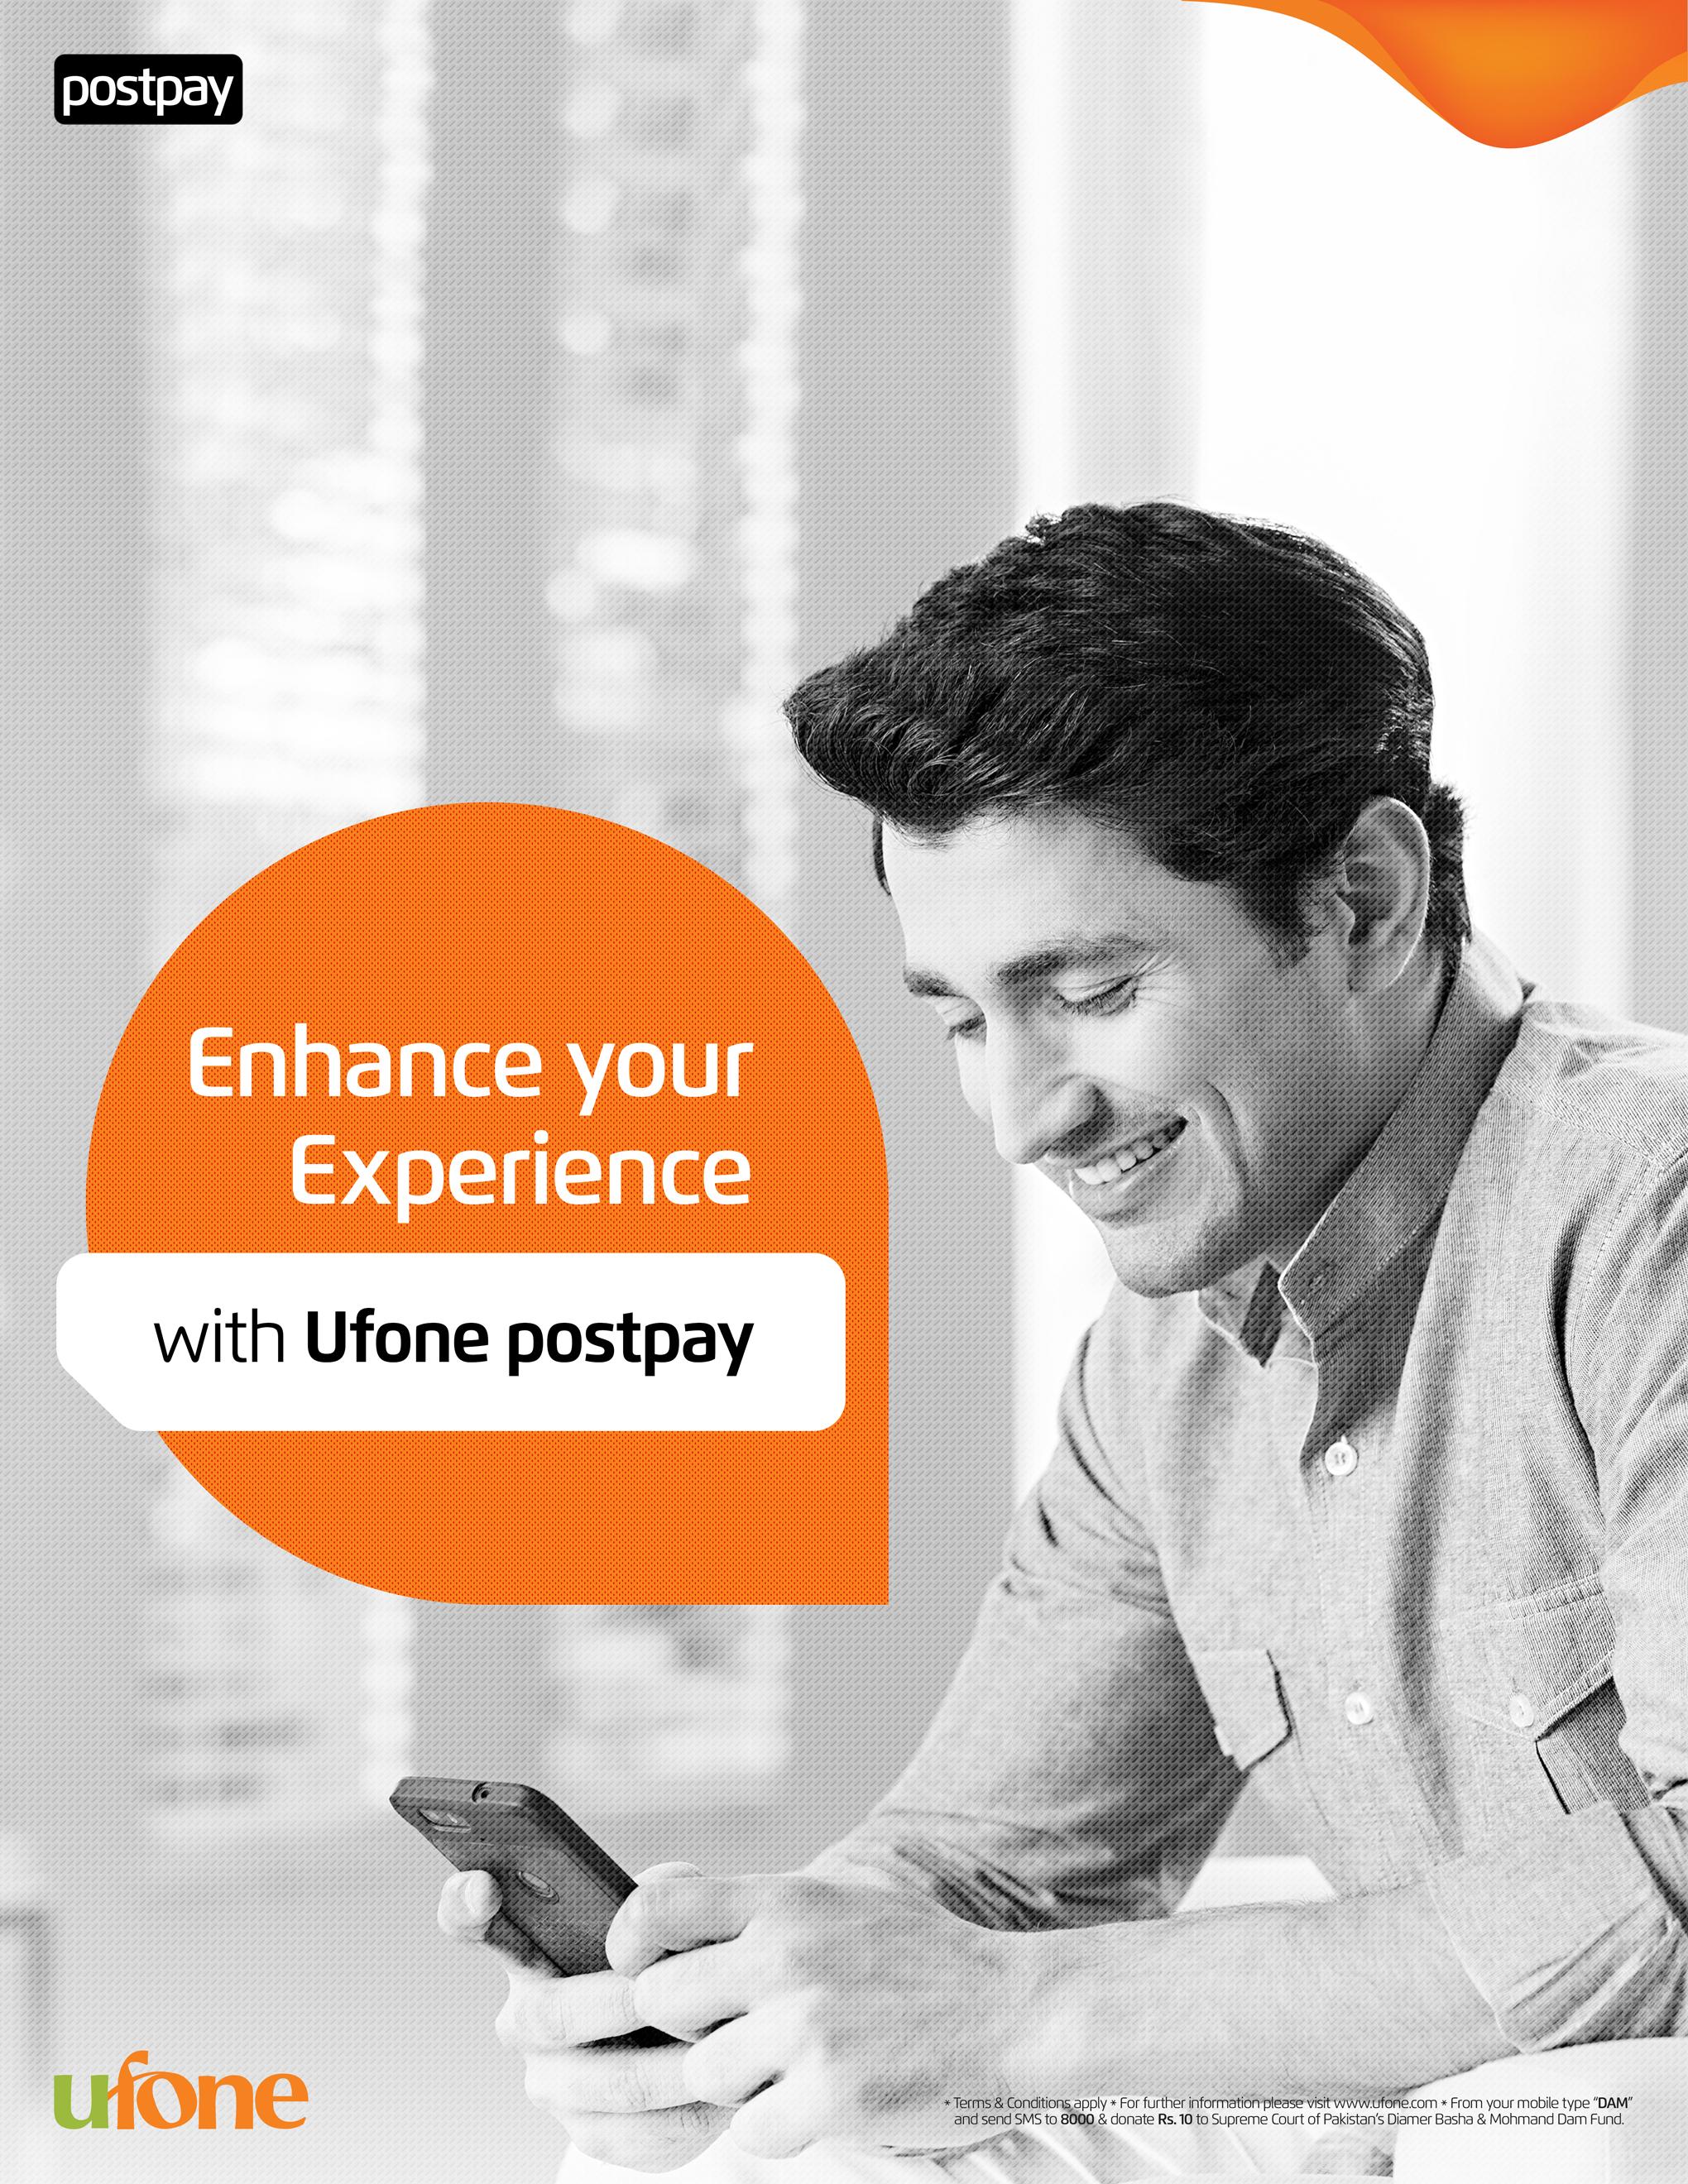 Ufone unveils new Prime Postpay packages